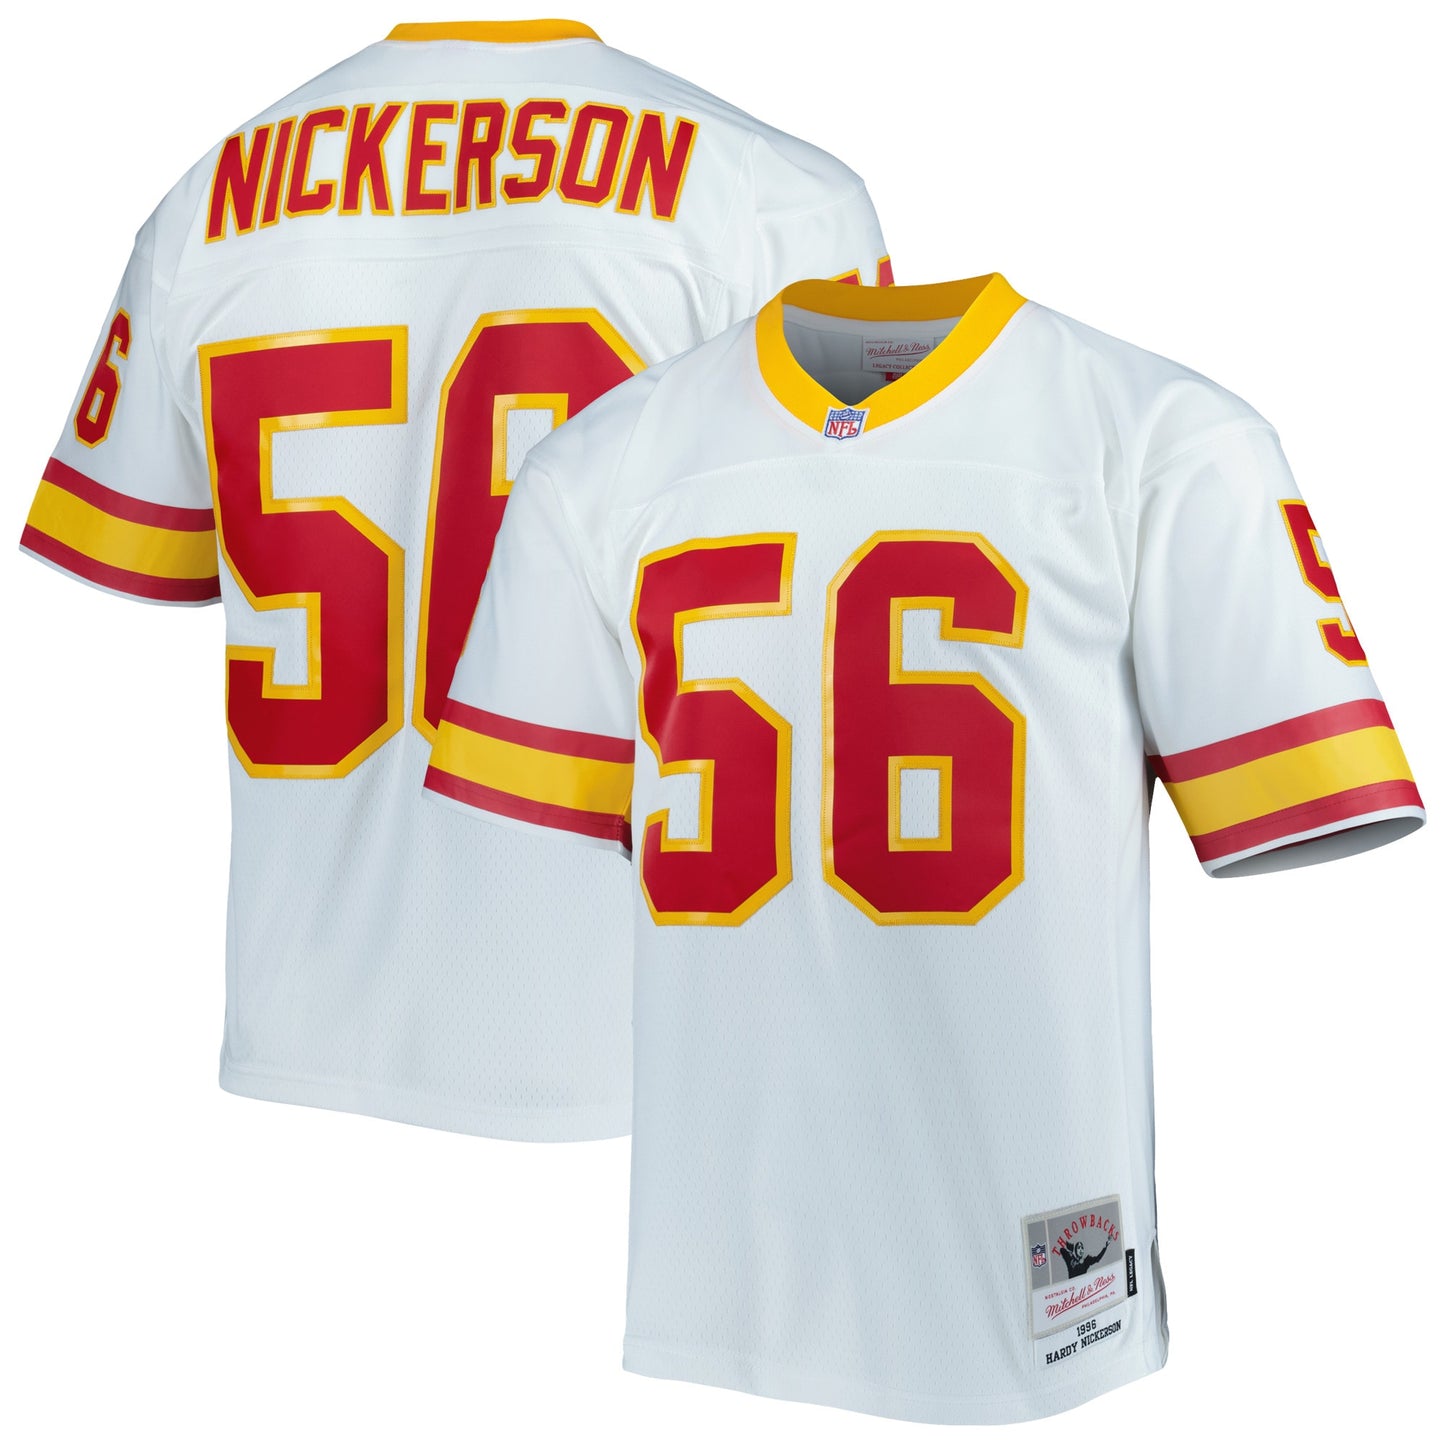 Hardy Nickerson Tampa Bay Buccaneers Mitchell & Ness Legacy Replica Jersey - White